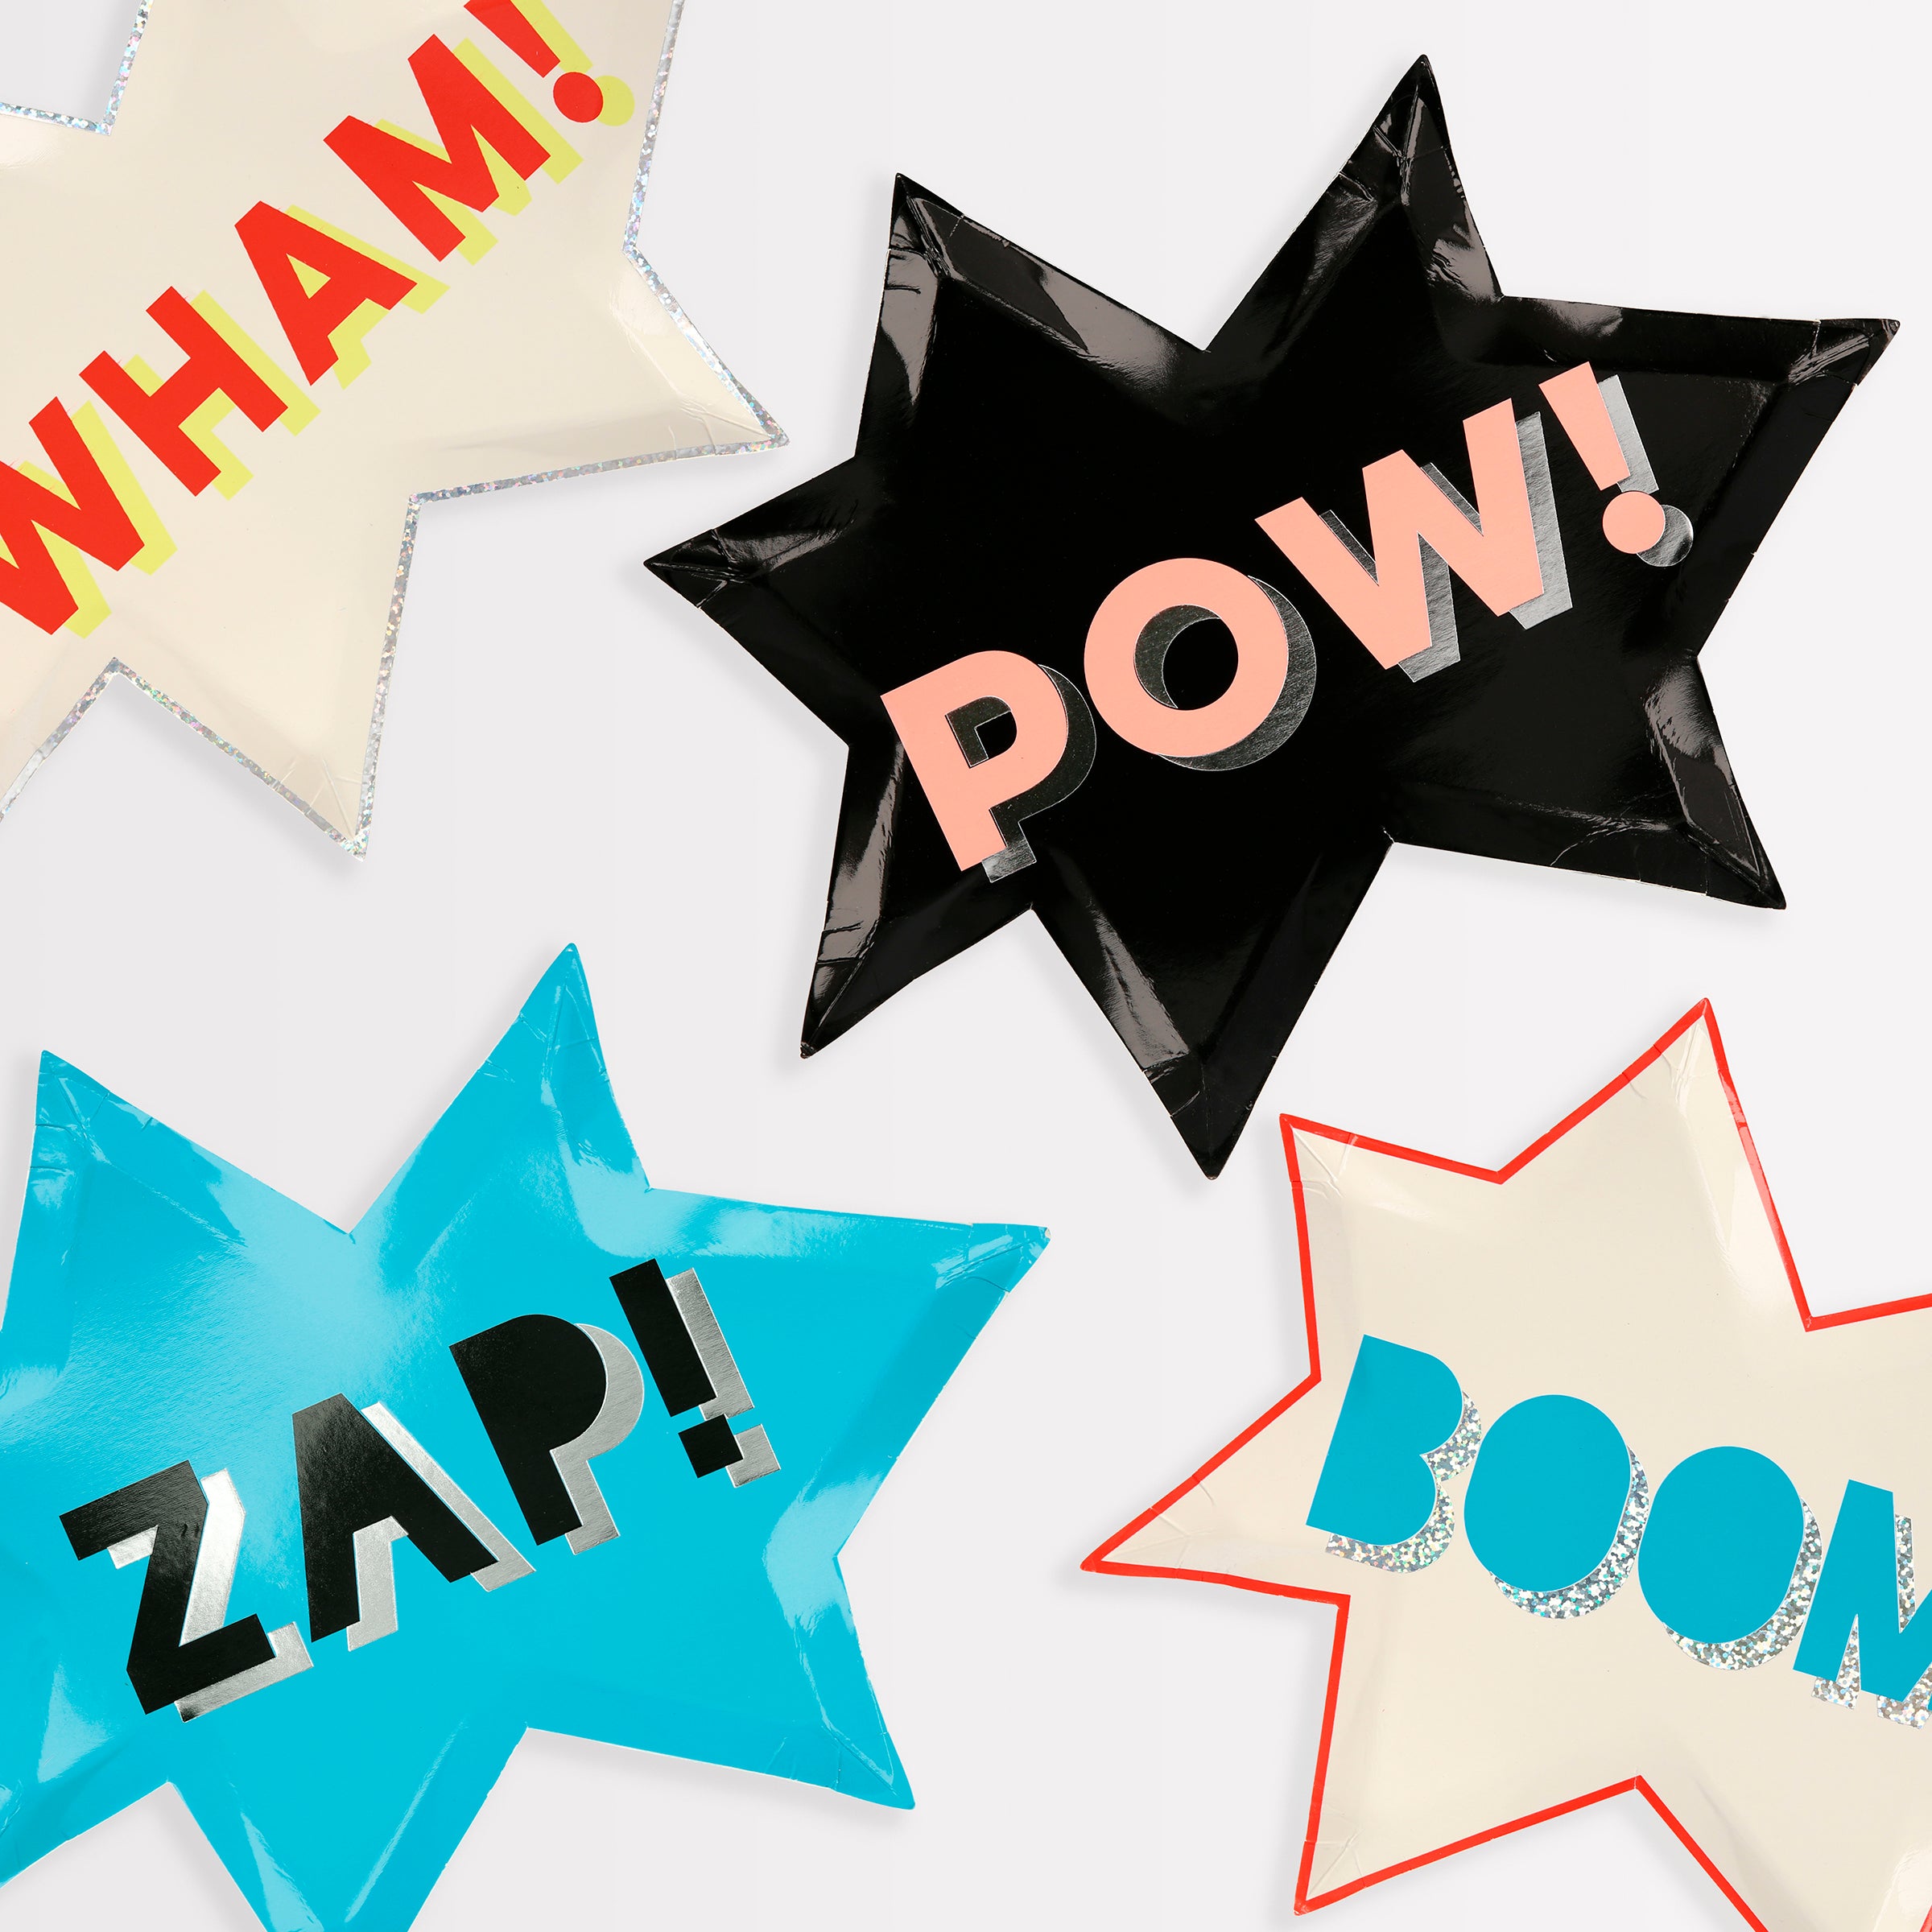 These party plates are ideal if you're looking for superhero party supplies, to decorate your party table.